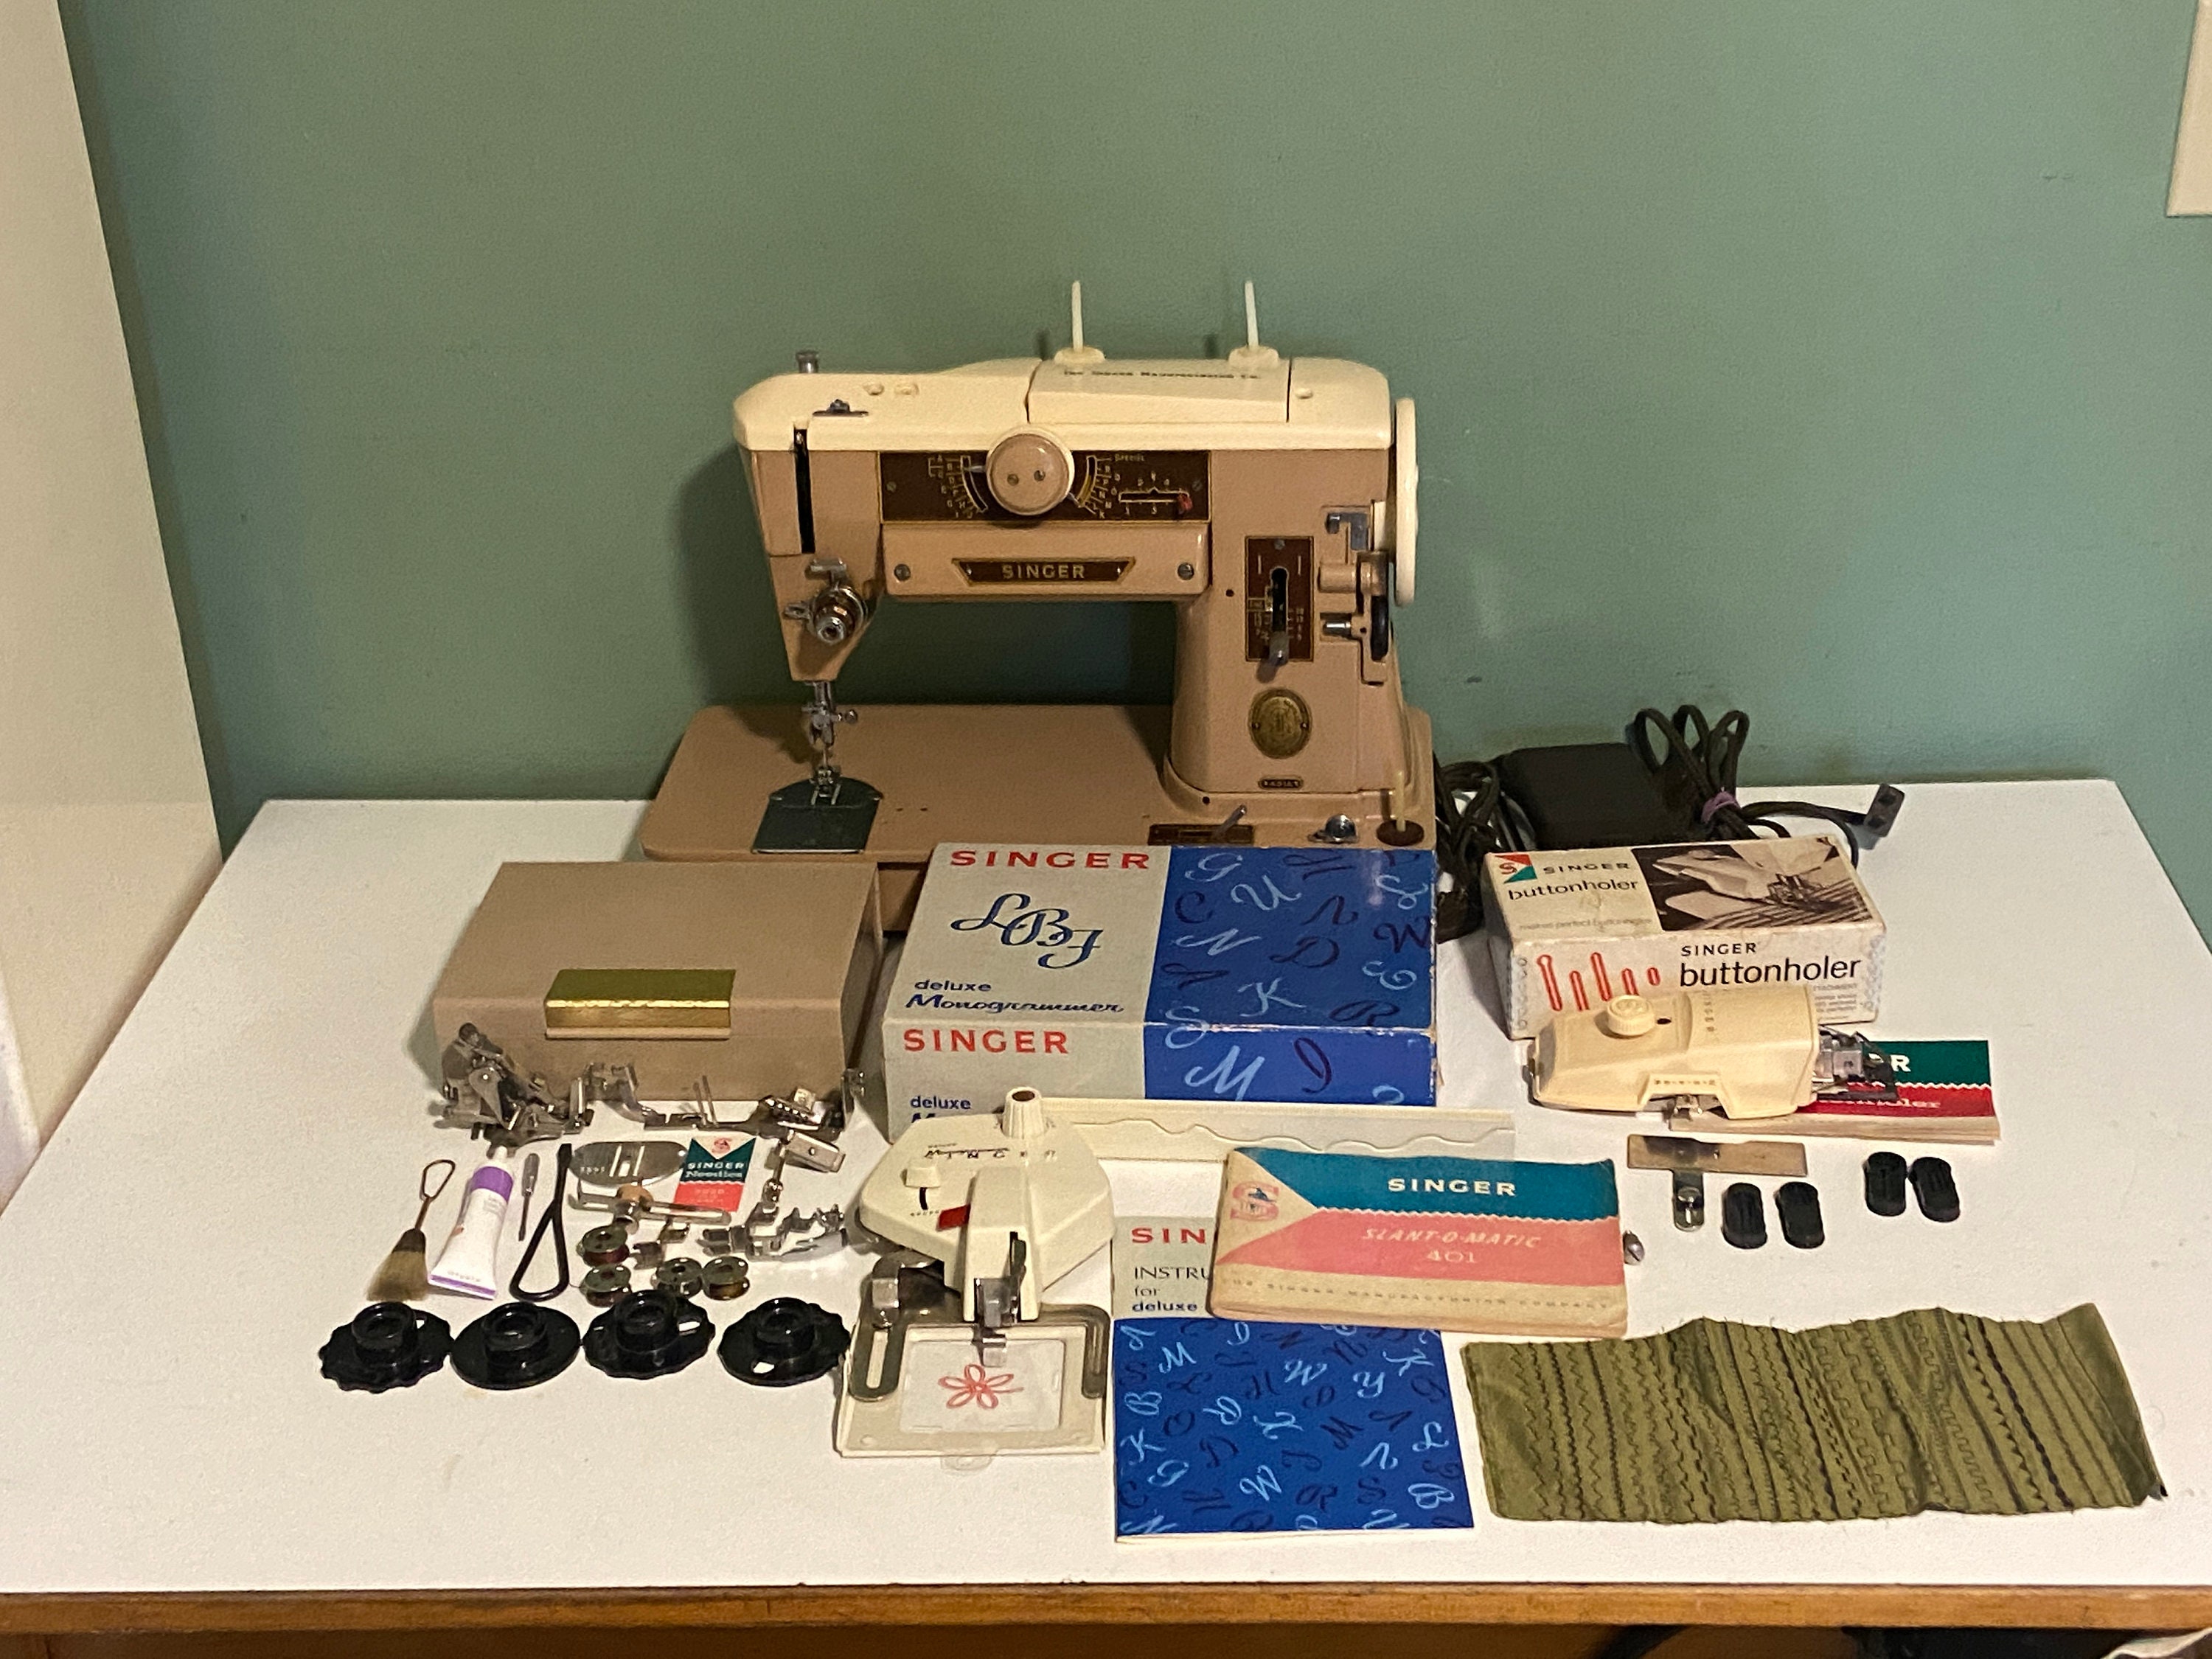 Sold at Auction: SINGER SLANT-O-MATIC 401 SEWING MACHINE KIT AND DESK